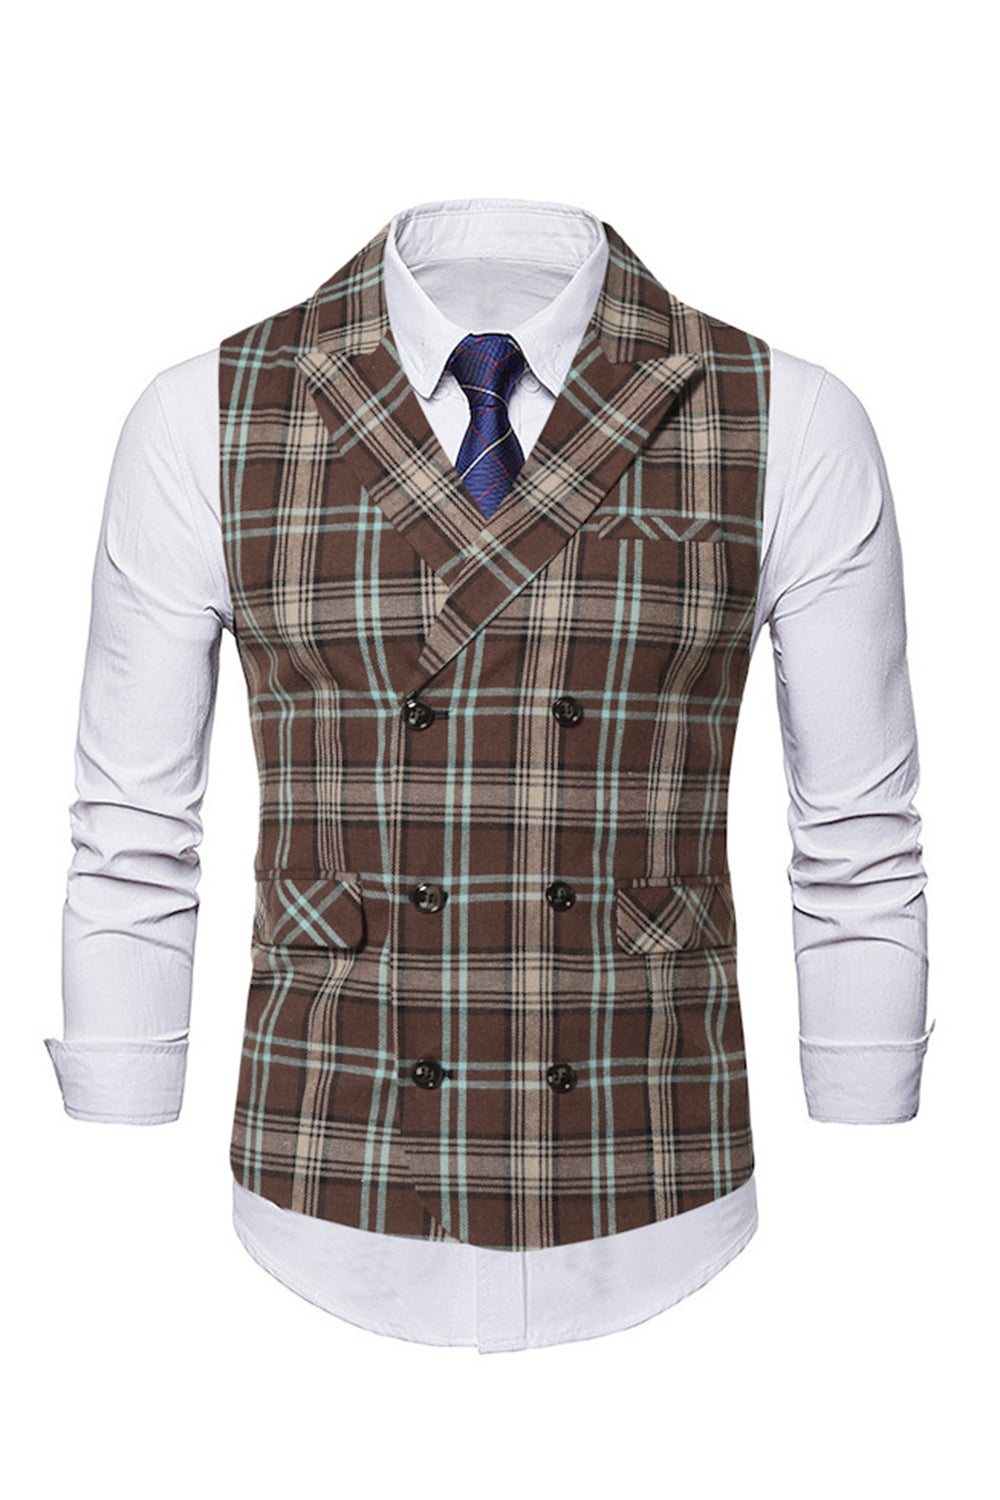 Shawl Collar LinkedIn Striped Double Breasted Brown Mens Suits Vest